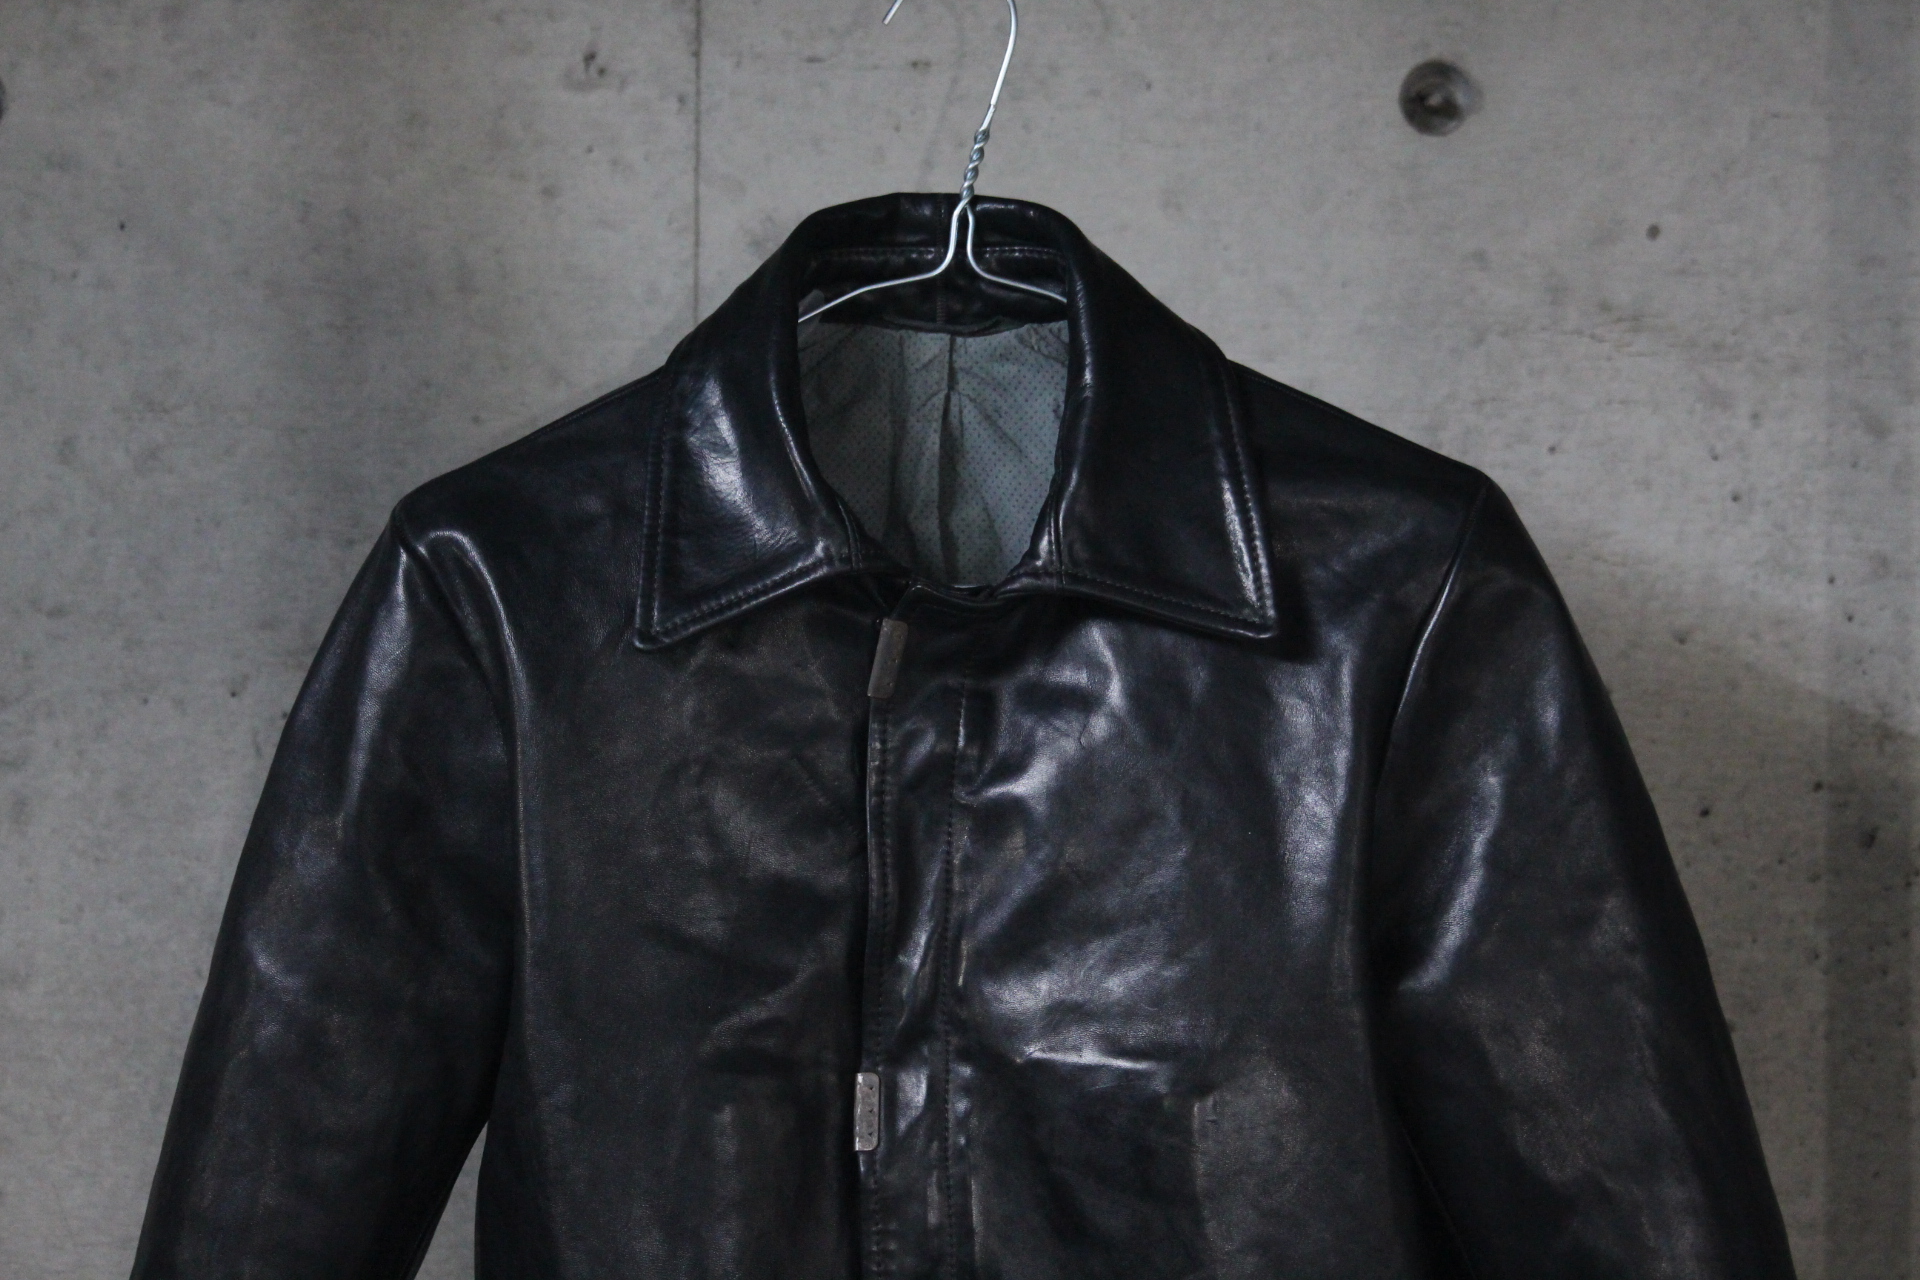 SCARSTITCHED LEATHER JACKET / CAROL CHRISTIAN POELL “LM/2498 CORS ...